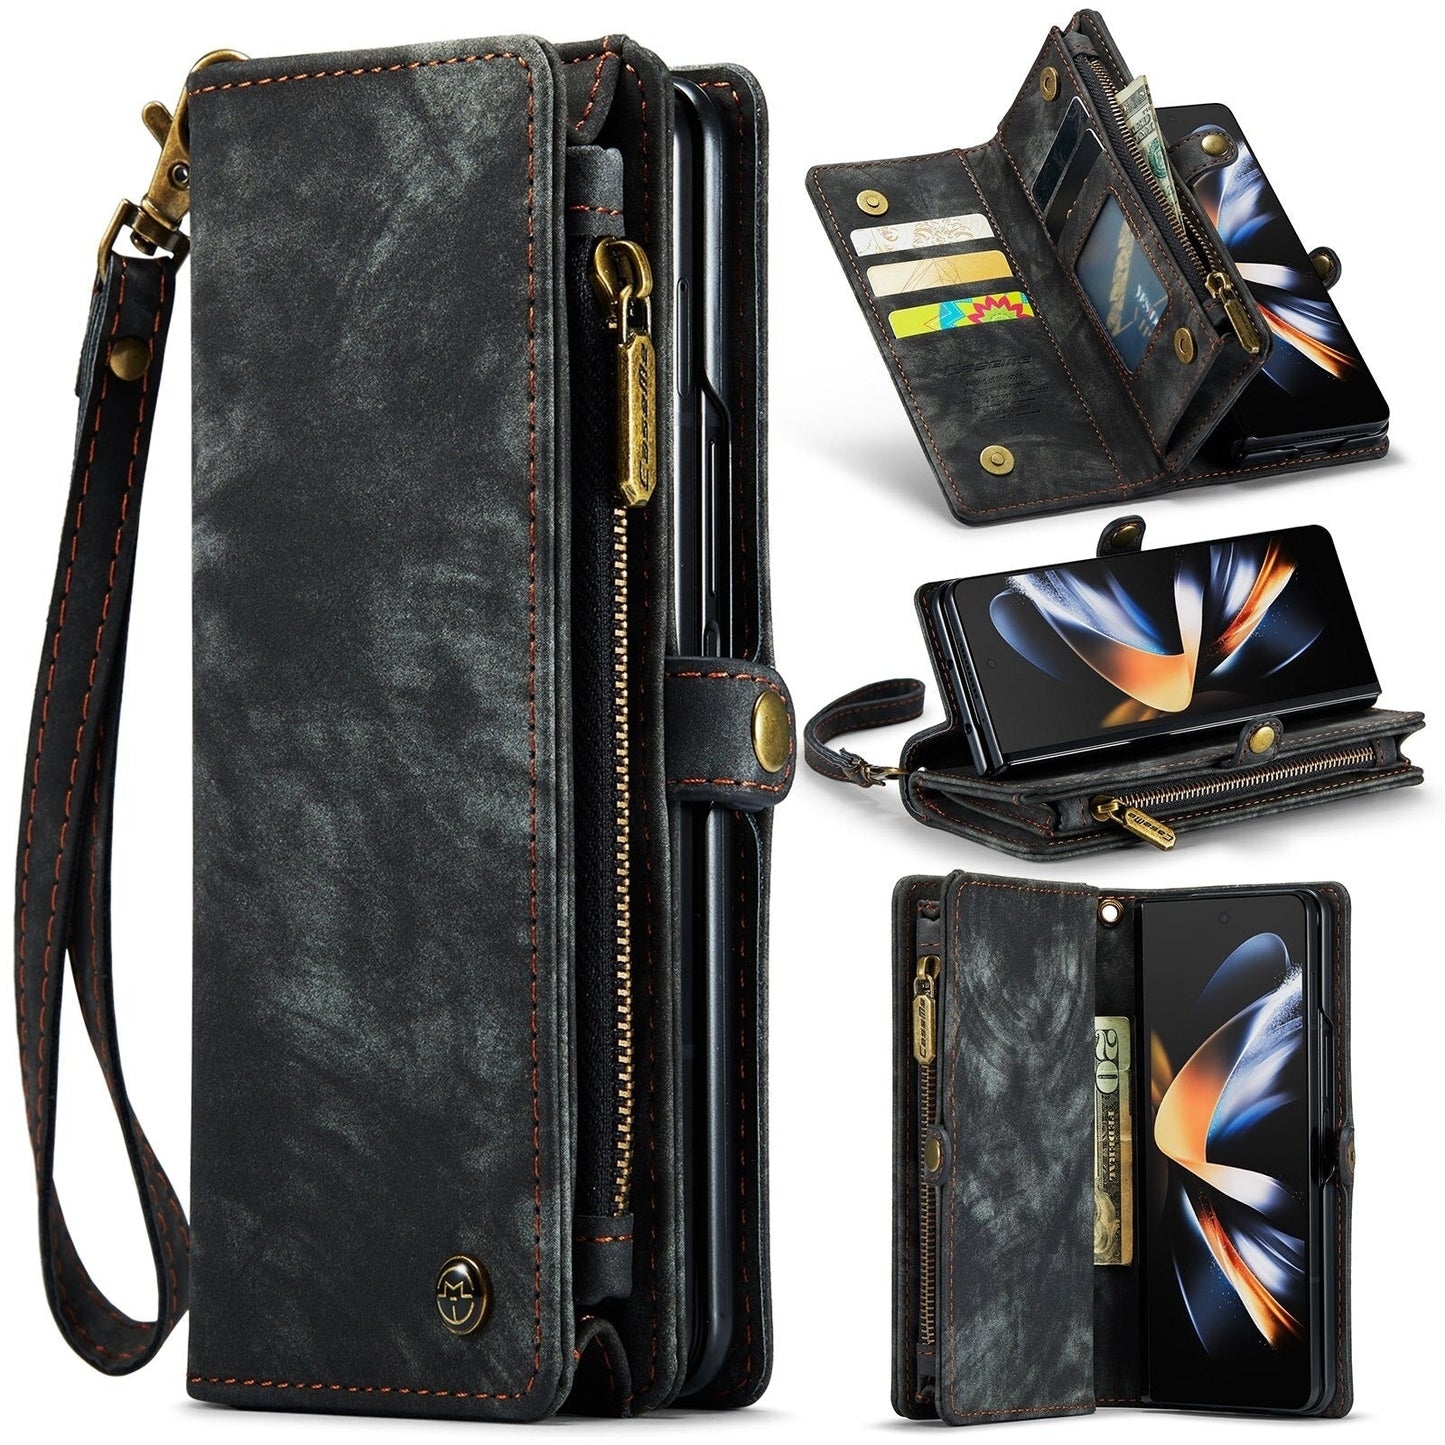 Fashion Magnetic PU Leather Flip Wallet Case